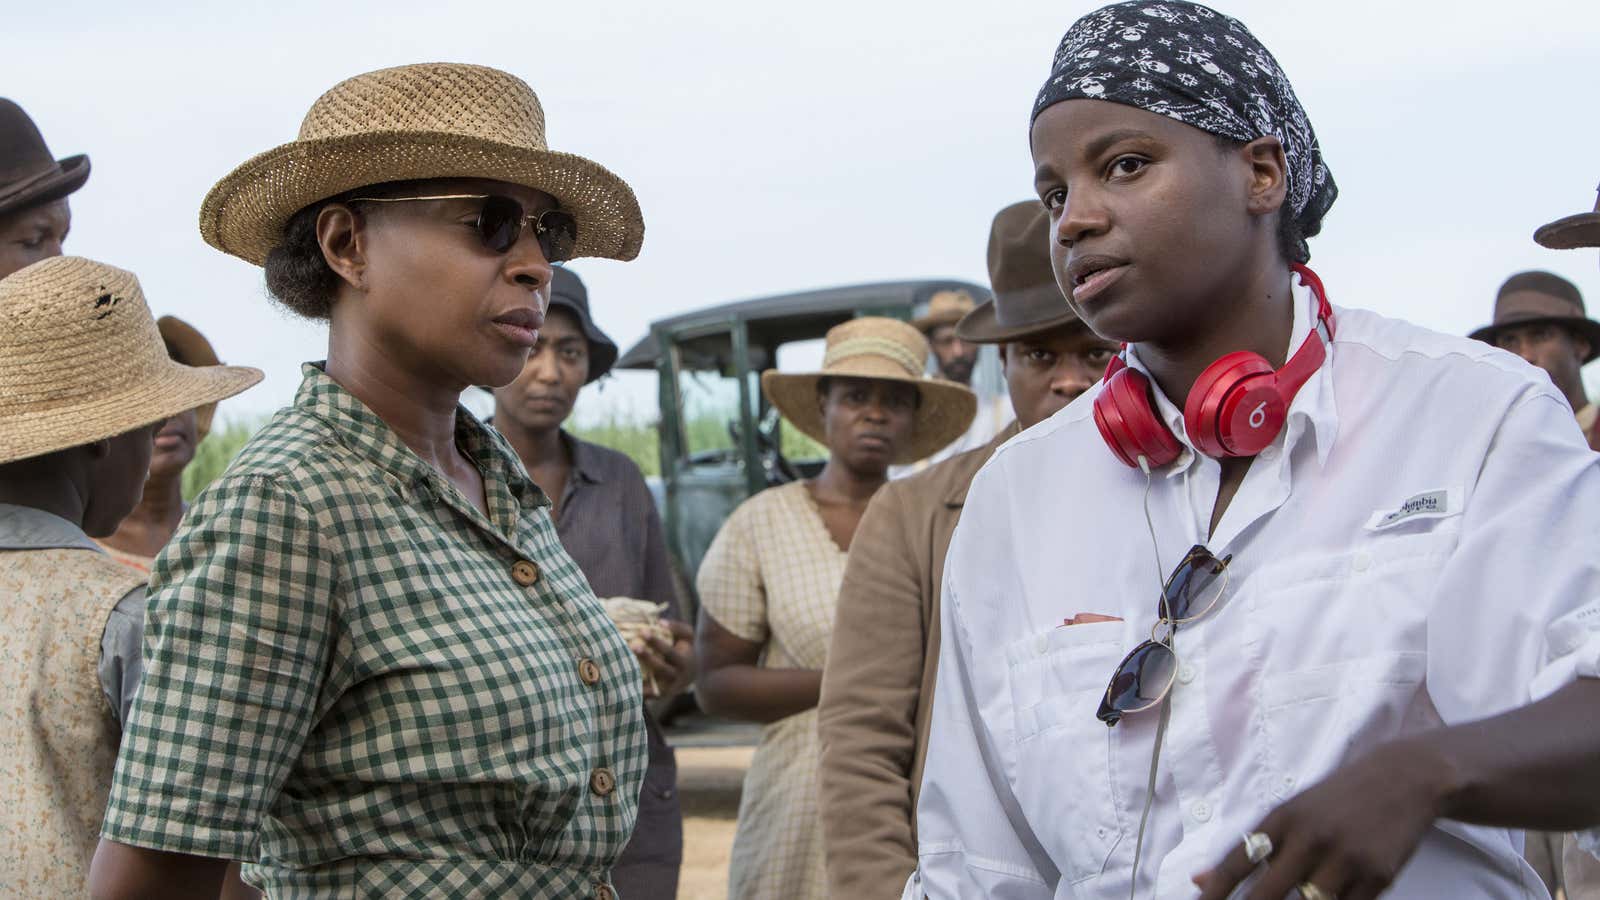 Director Dee Rees (right) talks with actress Mary J. Blige on the set of “Mudbound.”